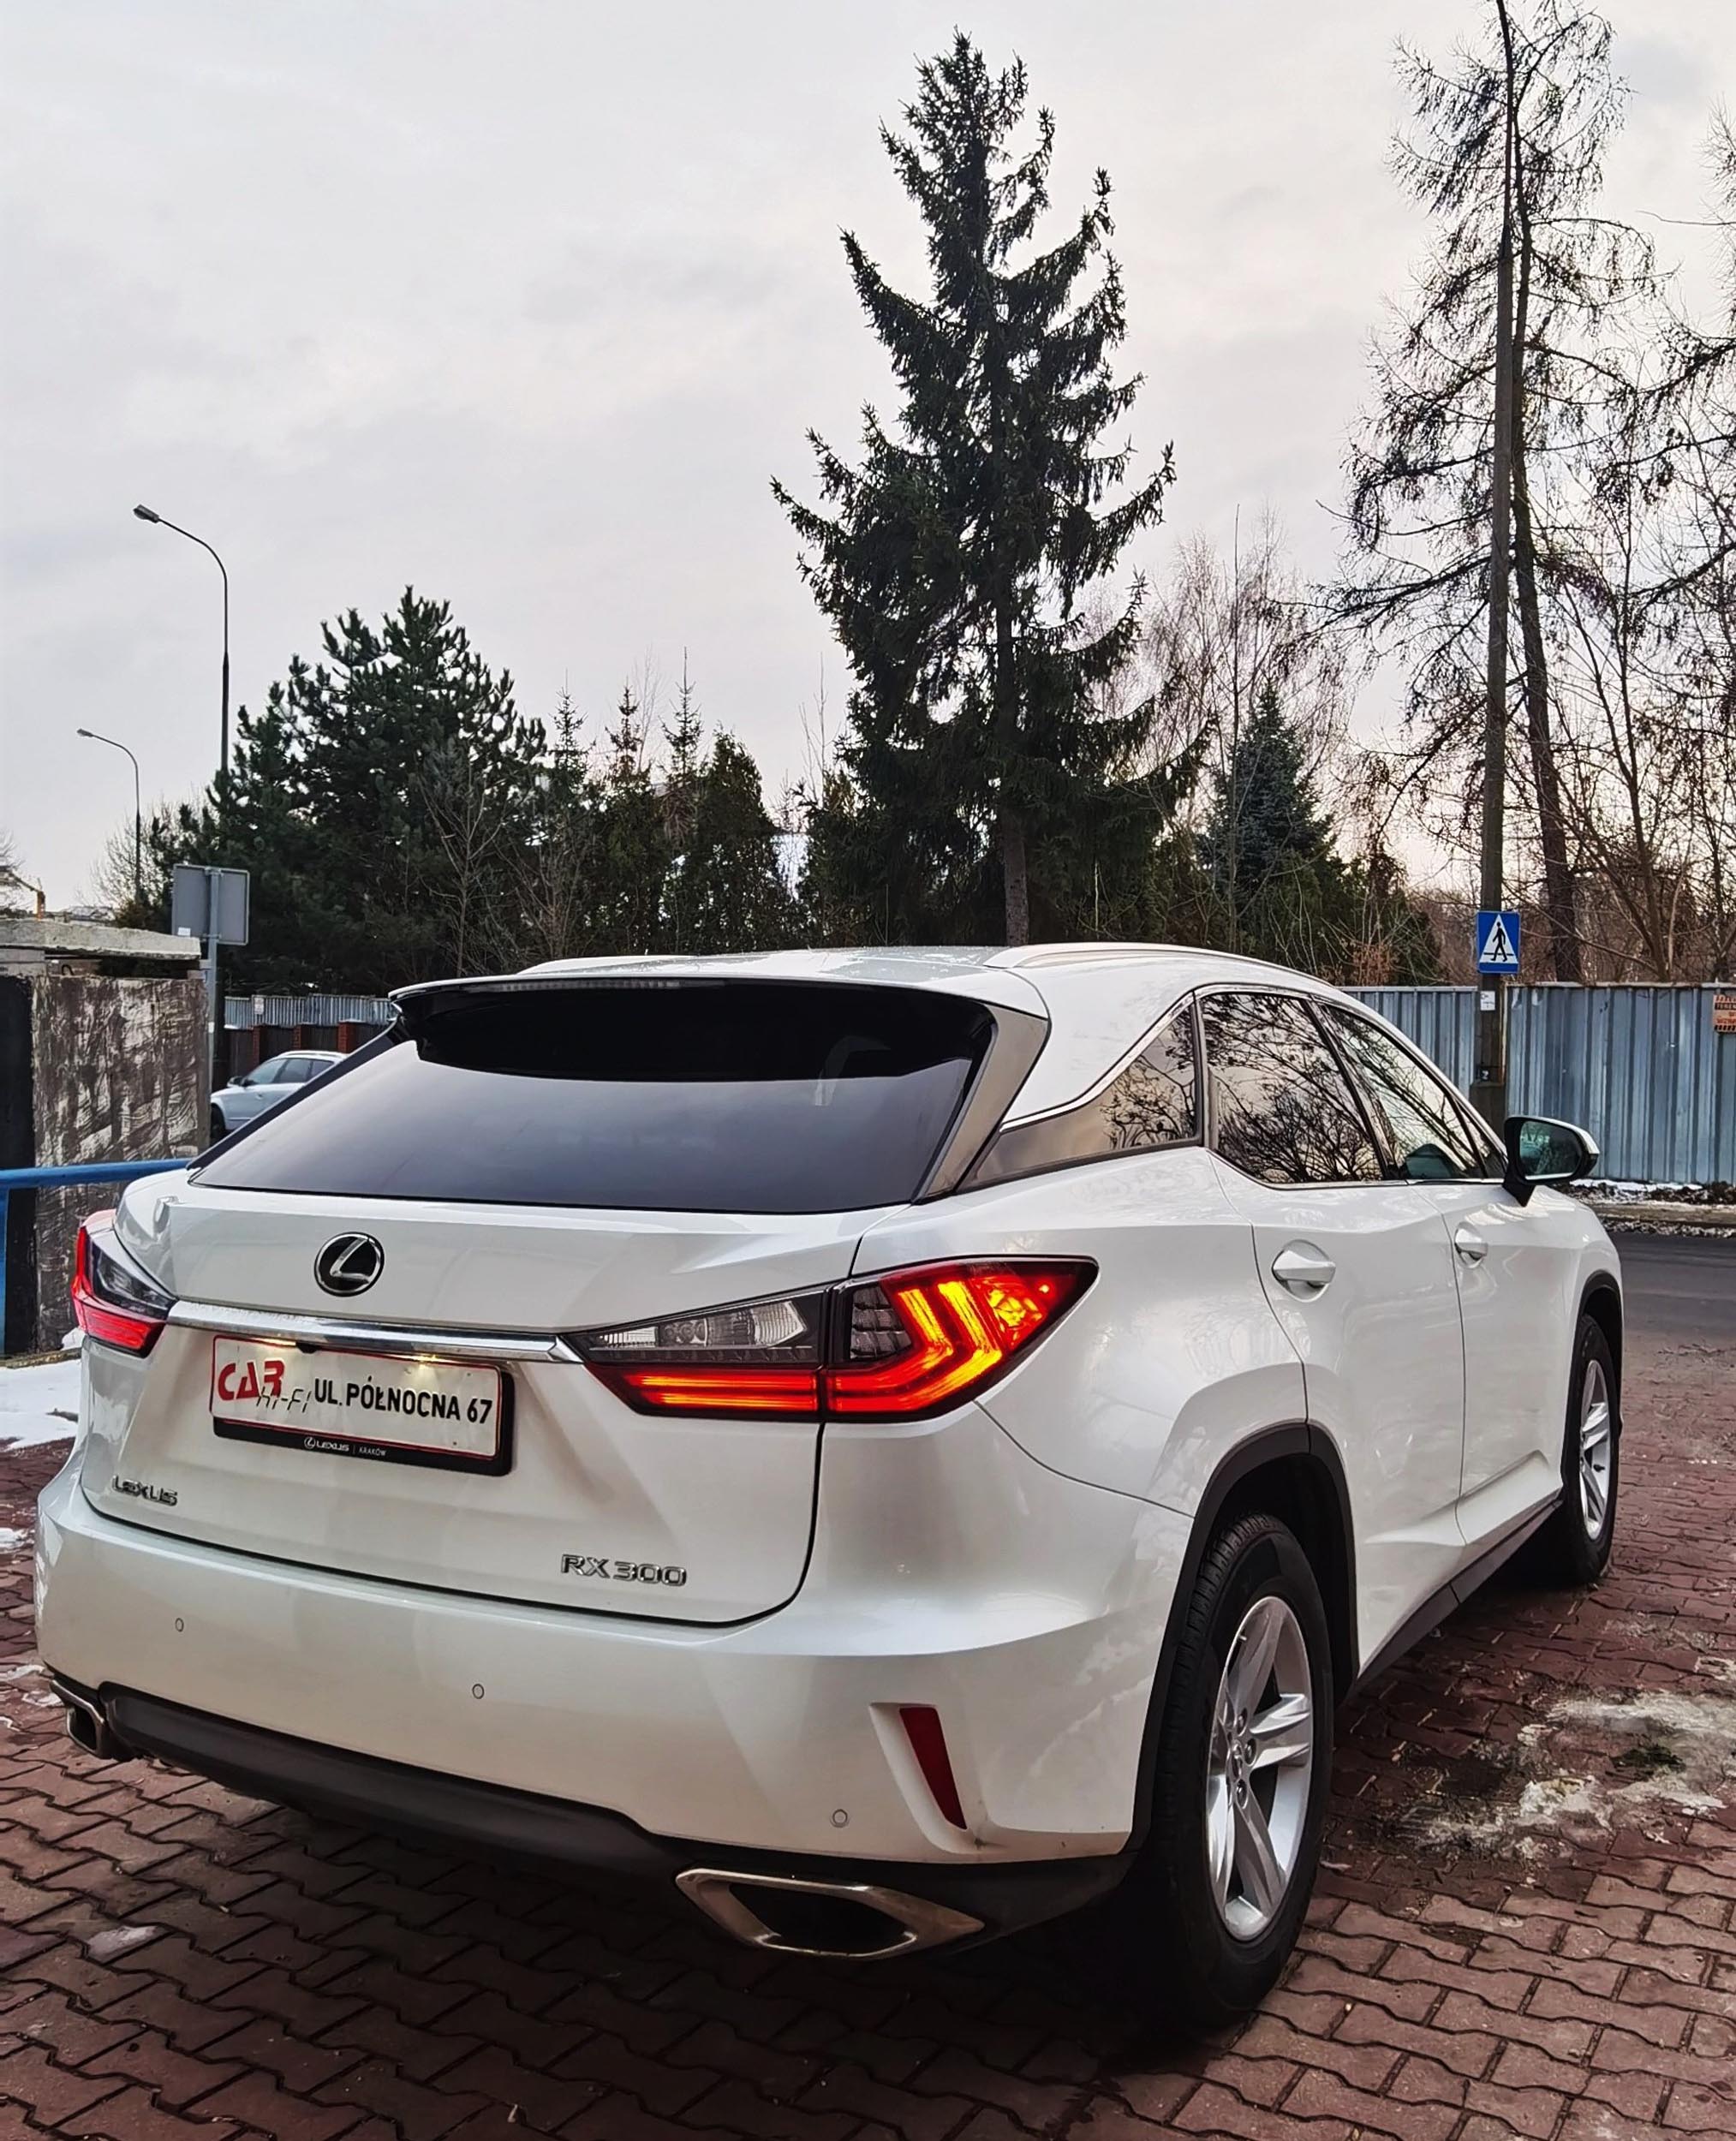 Read more about the article Montaż Car Play oraz monitora sufitowego Lexus RX300